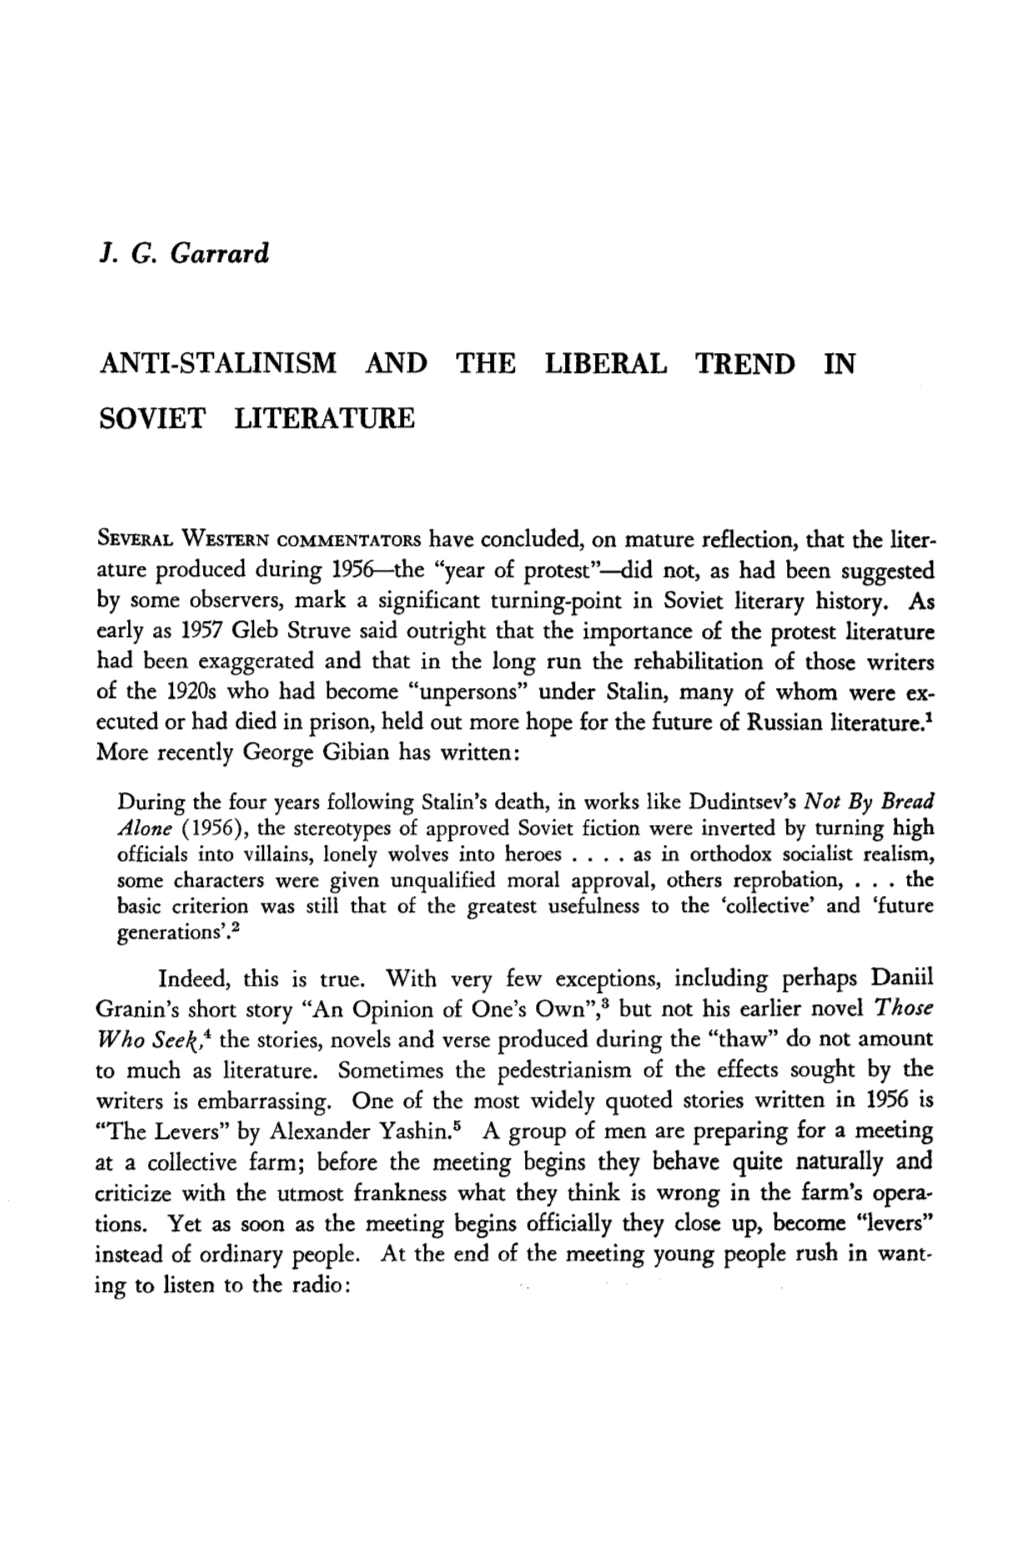 Anti-Stalinism and the Liberal Trend in Soviet Literature